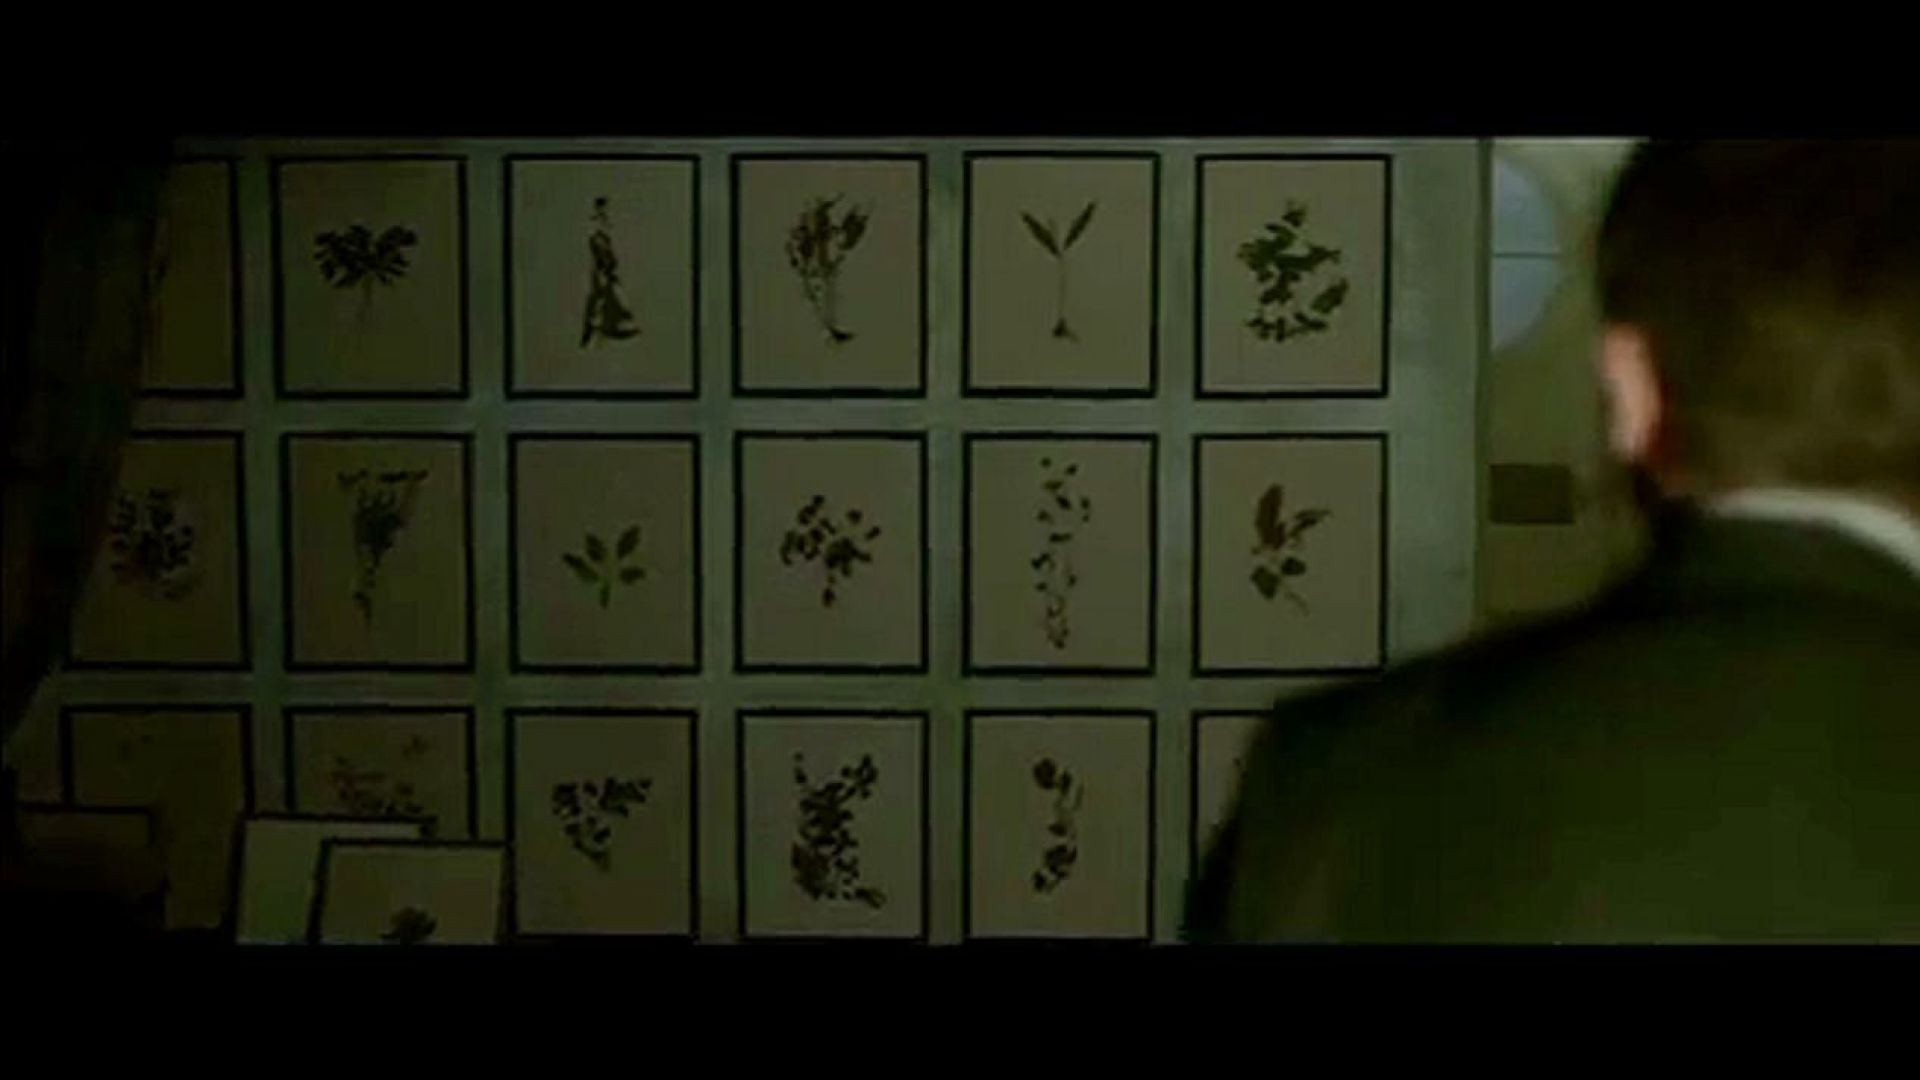 Christopher Plummer shows Daniel Craig the framed flowers in The Girl with the Dragon Tattoo